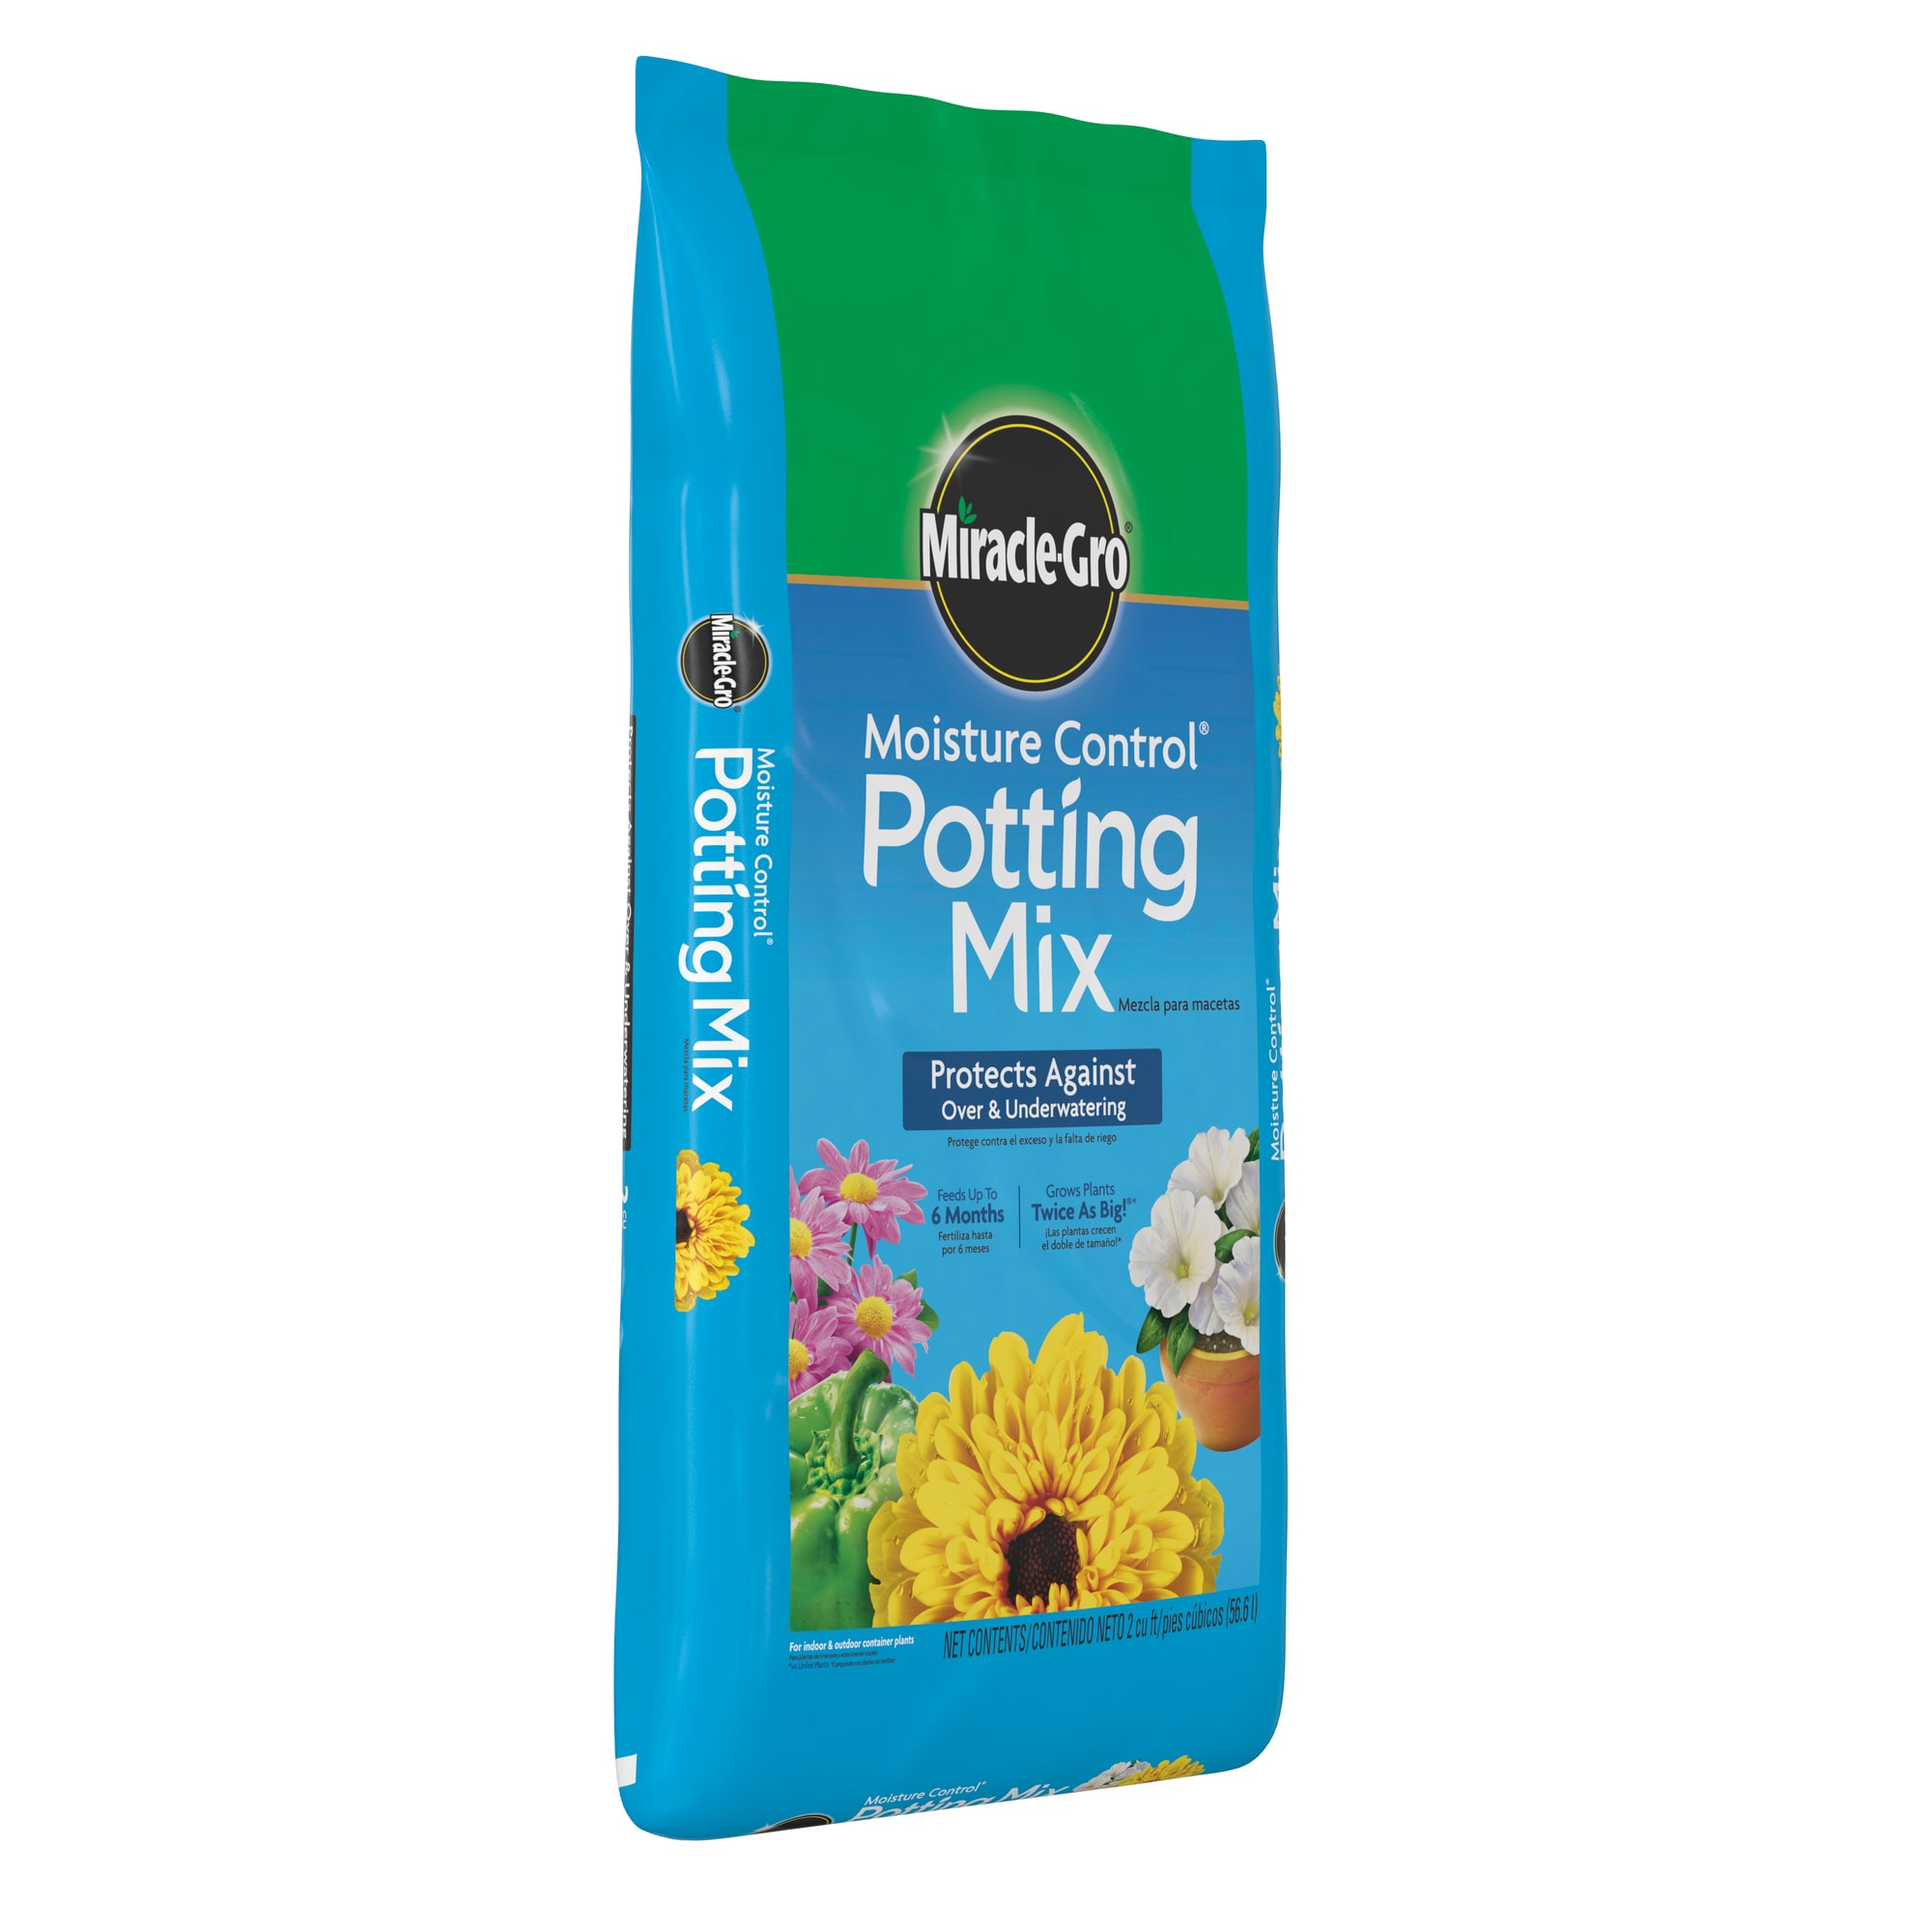 Image of Lowe's Miracle-Gro Moisture Control Potting Mix